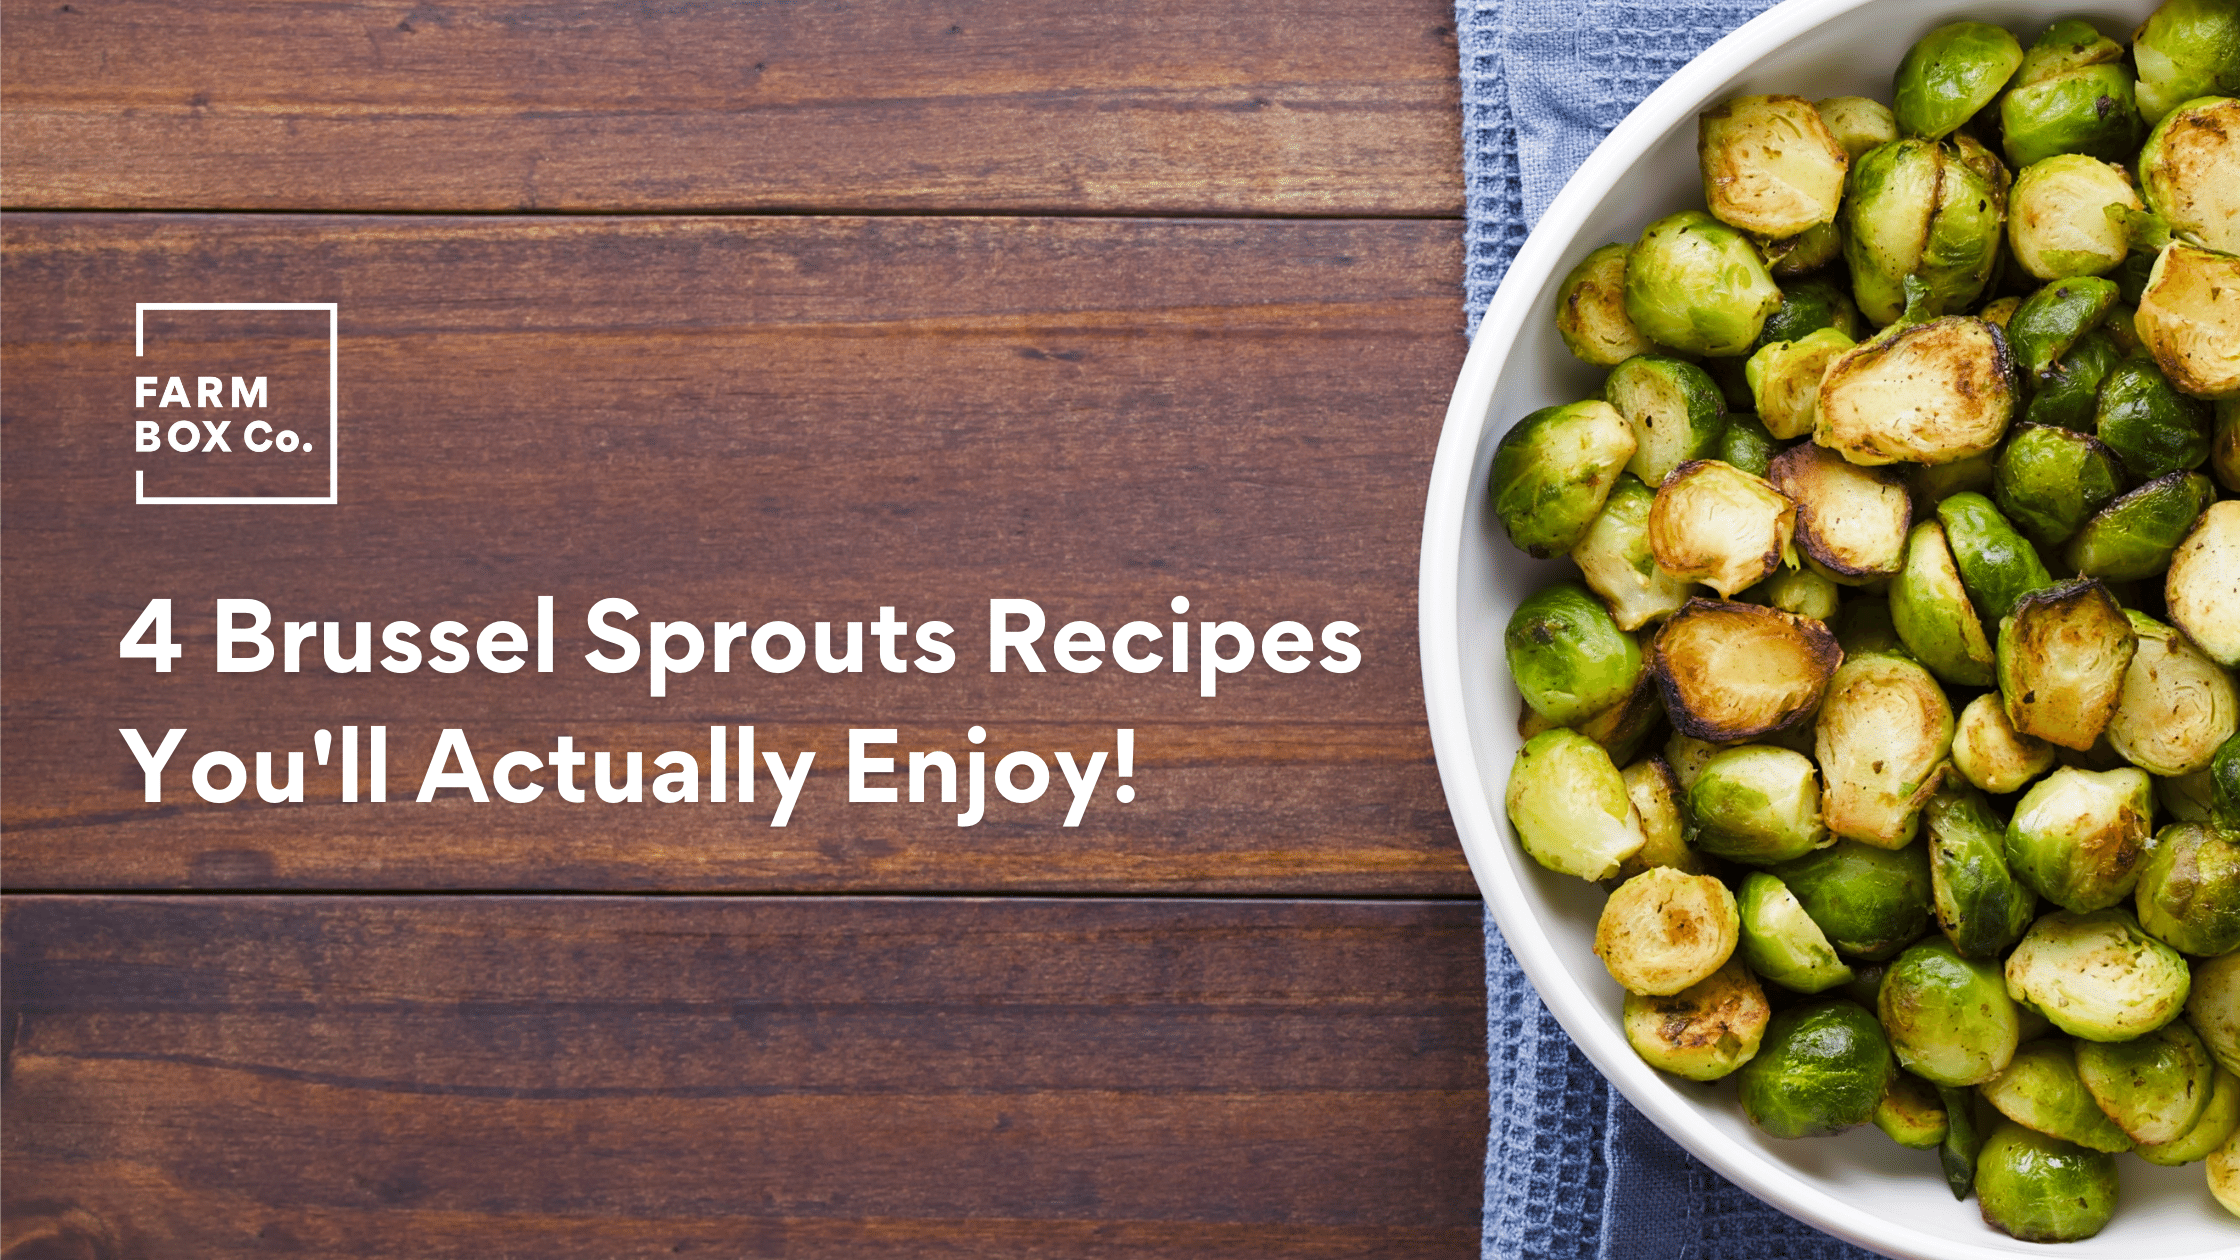 4 Brussel Sprouts Recipes You'll Actually Enjoy!